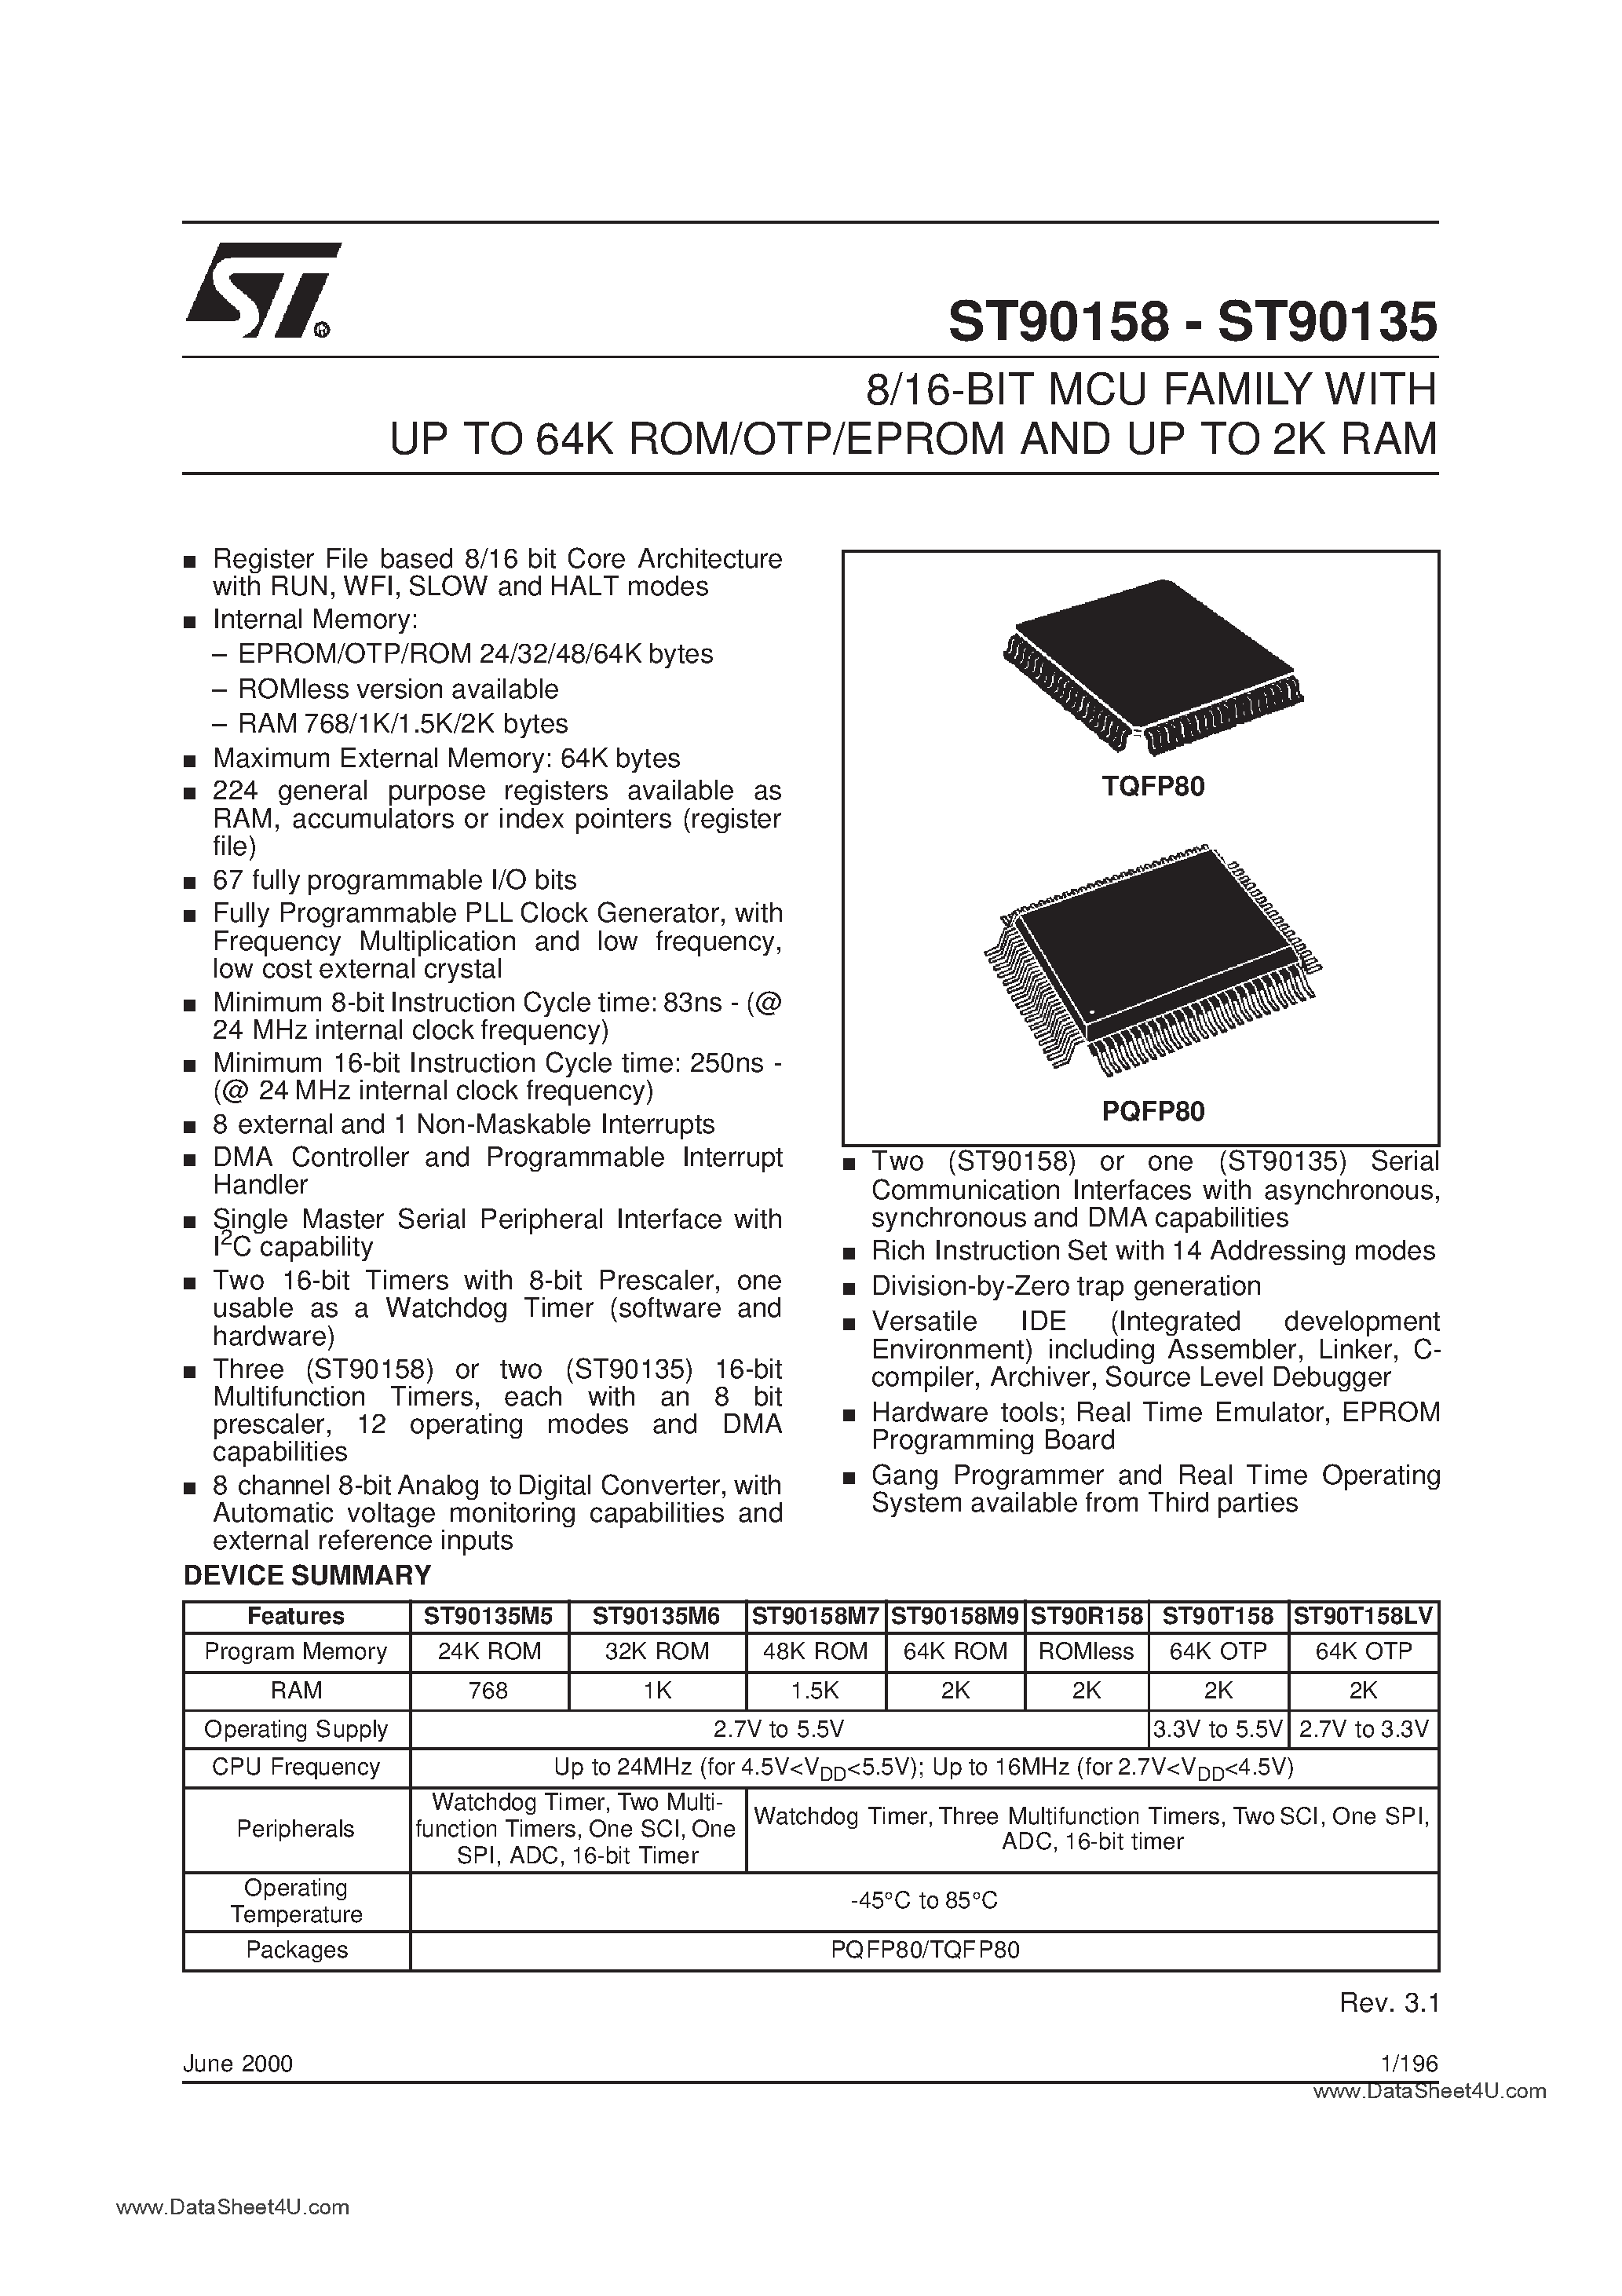 Datasheet ST90135 - (ST90135 / ST90158) Microcontroller page 1